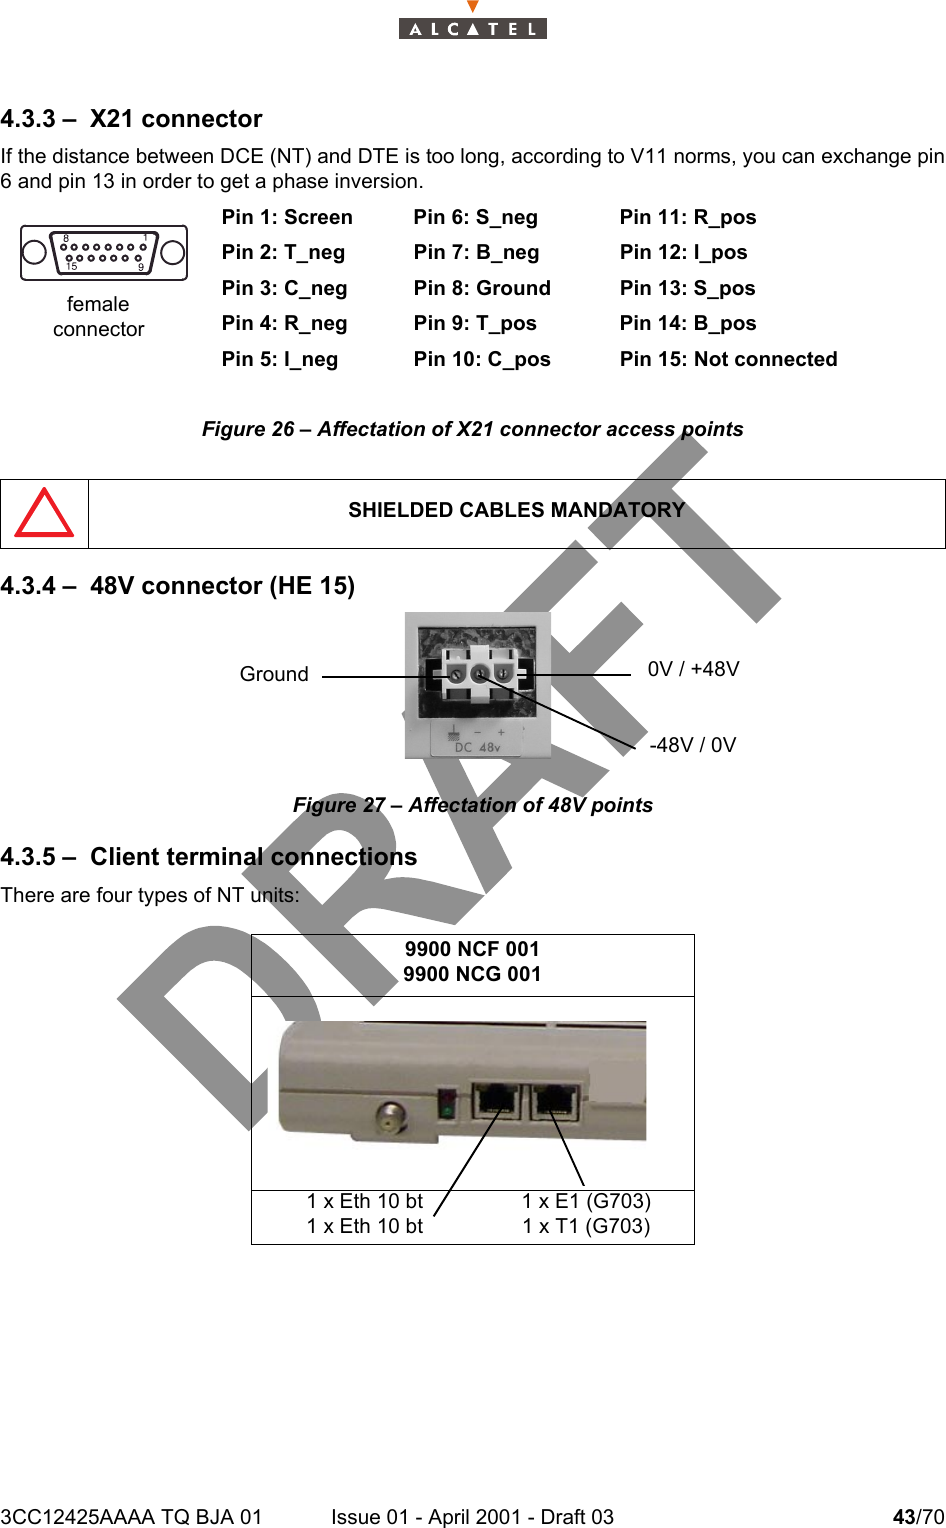 3CC12425AAAA TQ BJA 01 Issue 01 - April 2001 - Draft 03 43/70464.3.3 – X21 connectorIf the distance between DCE (NT) and DTE is too long, according to V11 norms, you can exchange pin6 and pin 13 in order to get a phase inversion.Pin 1: Screen Pin 6: S_neg Pin 11: R_posPin 2: T_neg Pin 7: B_neg Pin 12: I_posPin 3: C_neg Pin 8: Ground Pin 13: S_posPin 4: R_neg Pin 9: T_pos Pin 14: B_posPin 5: I_neg Pin 10: C_pos Pin 15: Not connectedFigure 26 – Affectation of X21 connector access points4.3.4 – 48V connector (HE 15)Figure 27 – Affectation of 48V points4.3.5 – Client terminal connectionsThere are four types of NT units: SHIELDED CABLES MANDATORY9900 NCF 0019900 NCG 0011 x Eth 10 bt1 x Eth 10 bt1 x E1 (G703)1 x T1 (G703)femaleconnectorGround  0V / +48V-48V / 0V